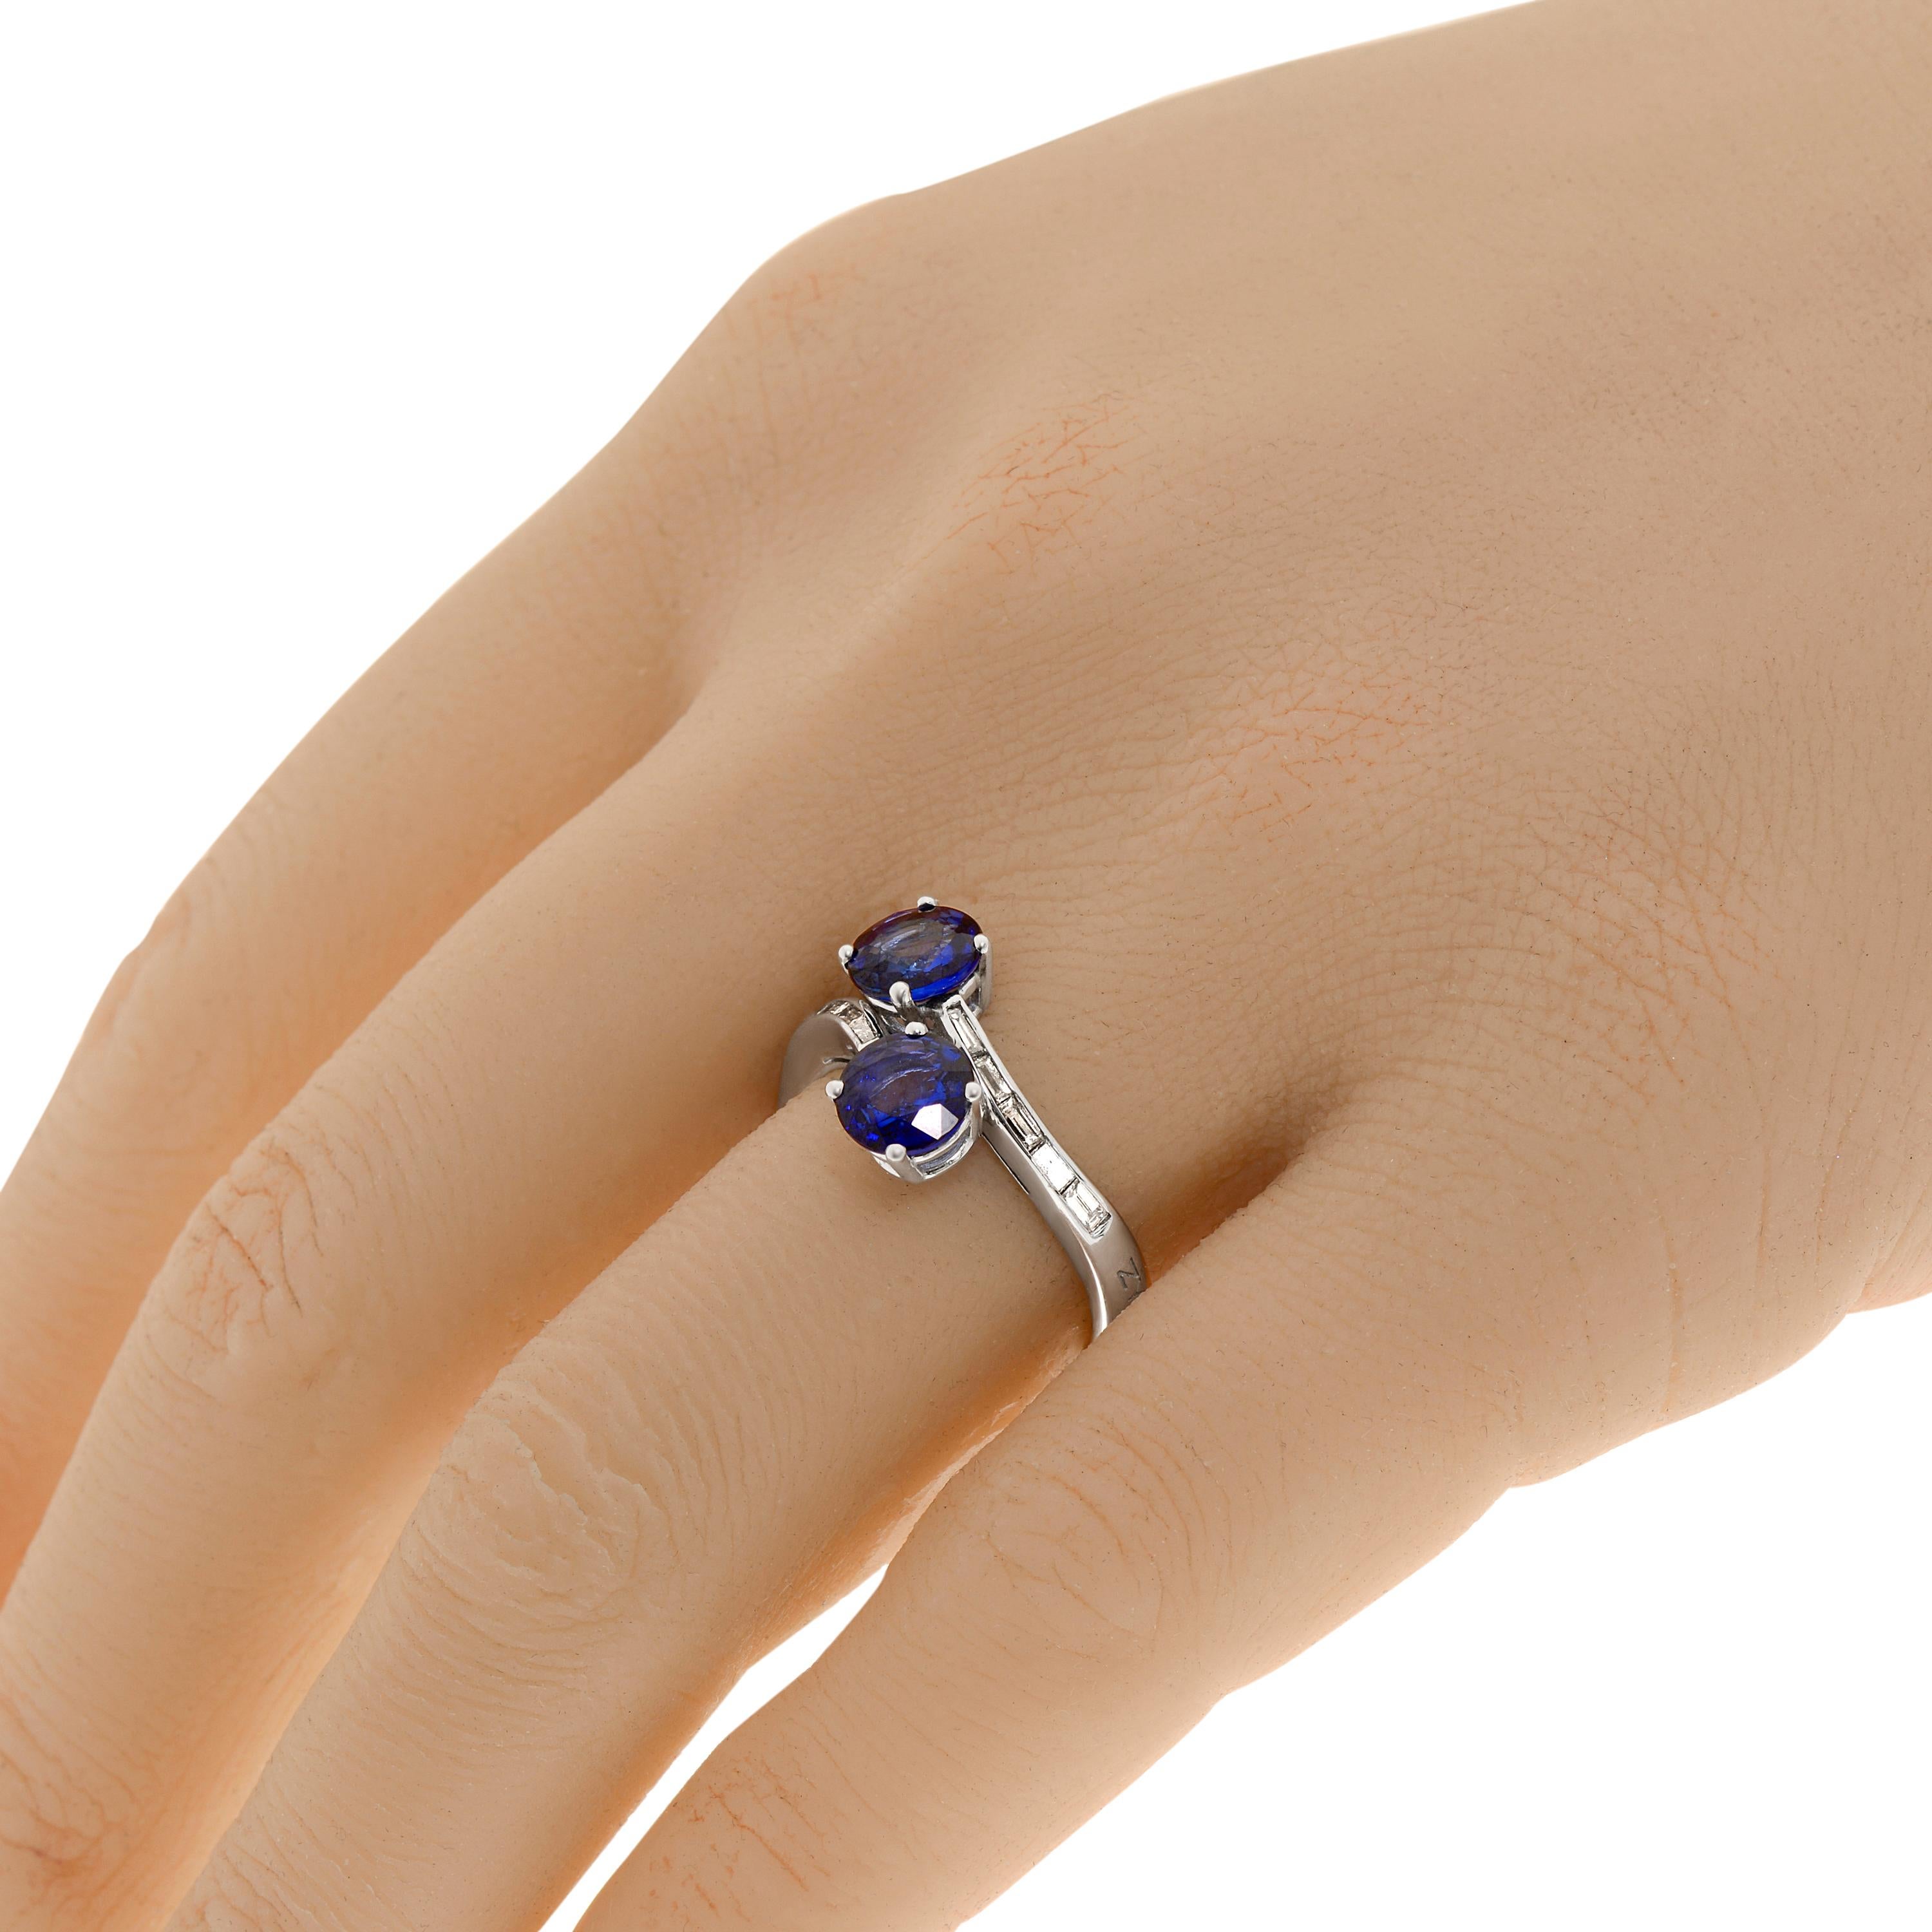 Zydo 18K White Gold Contrarier Ring features 2.16ct. tw. sapphire gemstones with 0.38ct. tw. diamond accents. The ring size is 6.5 (53.1). The decoration size is 1/2